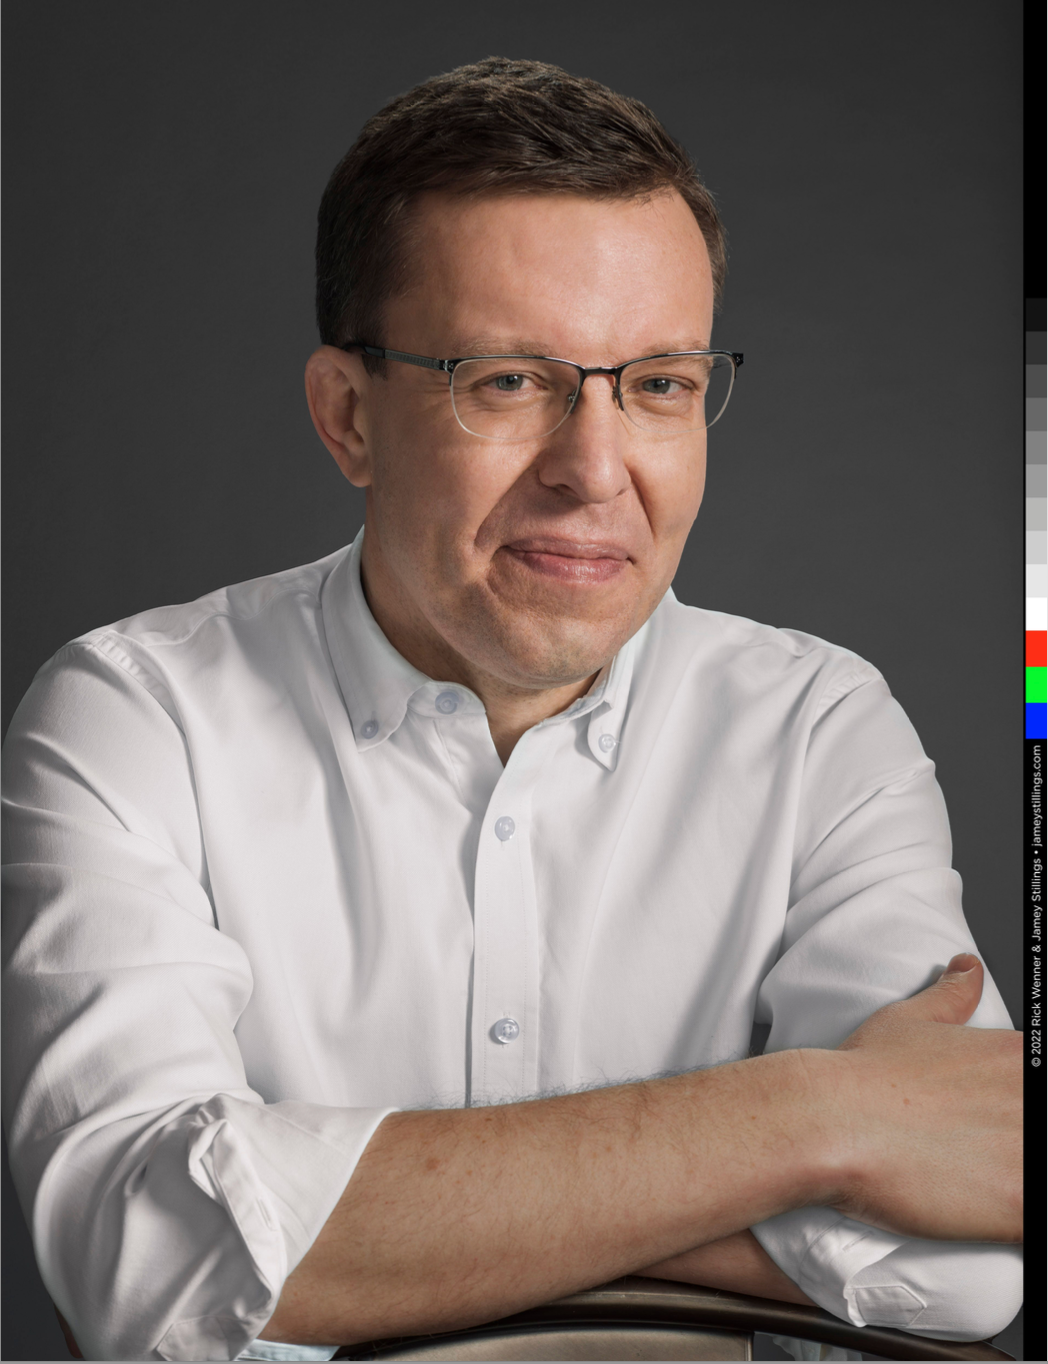 Man in white shirt and glasses poses with arms crossed